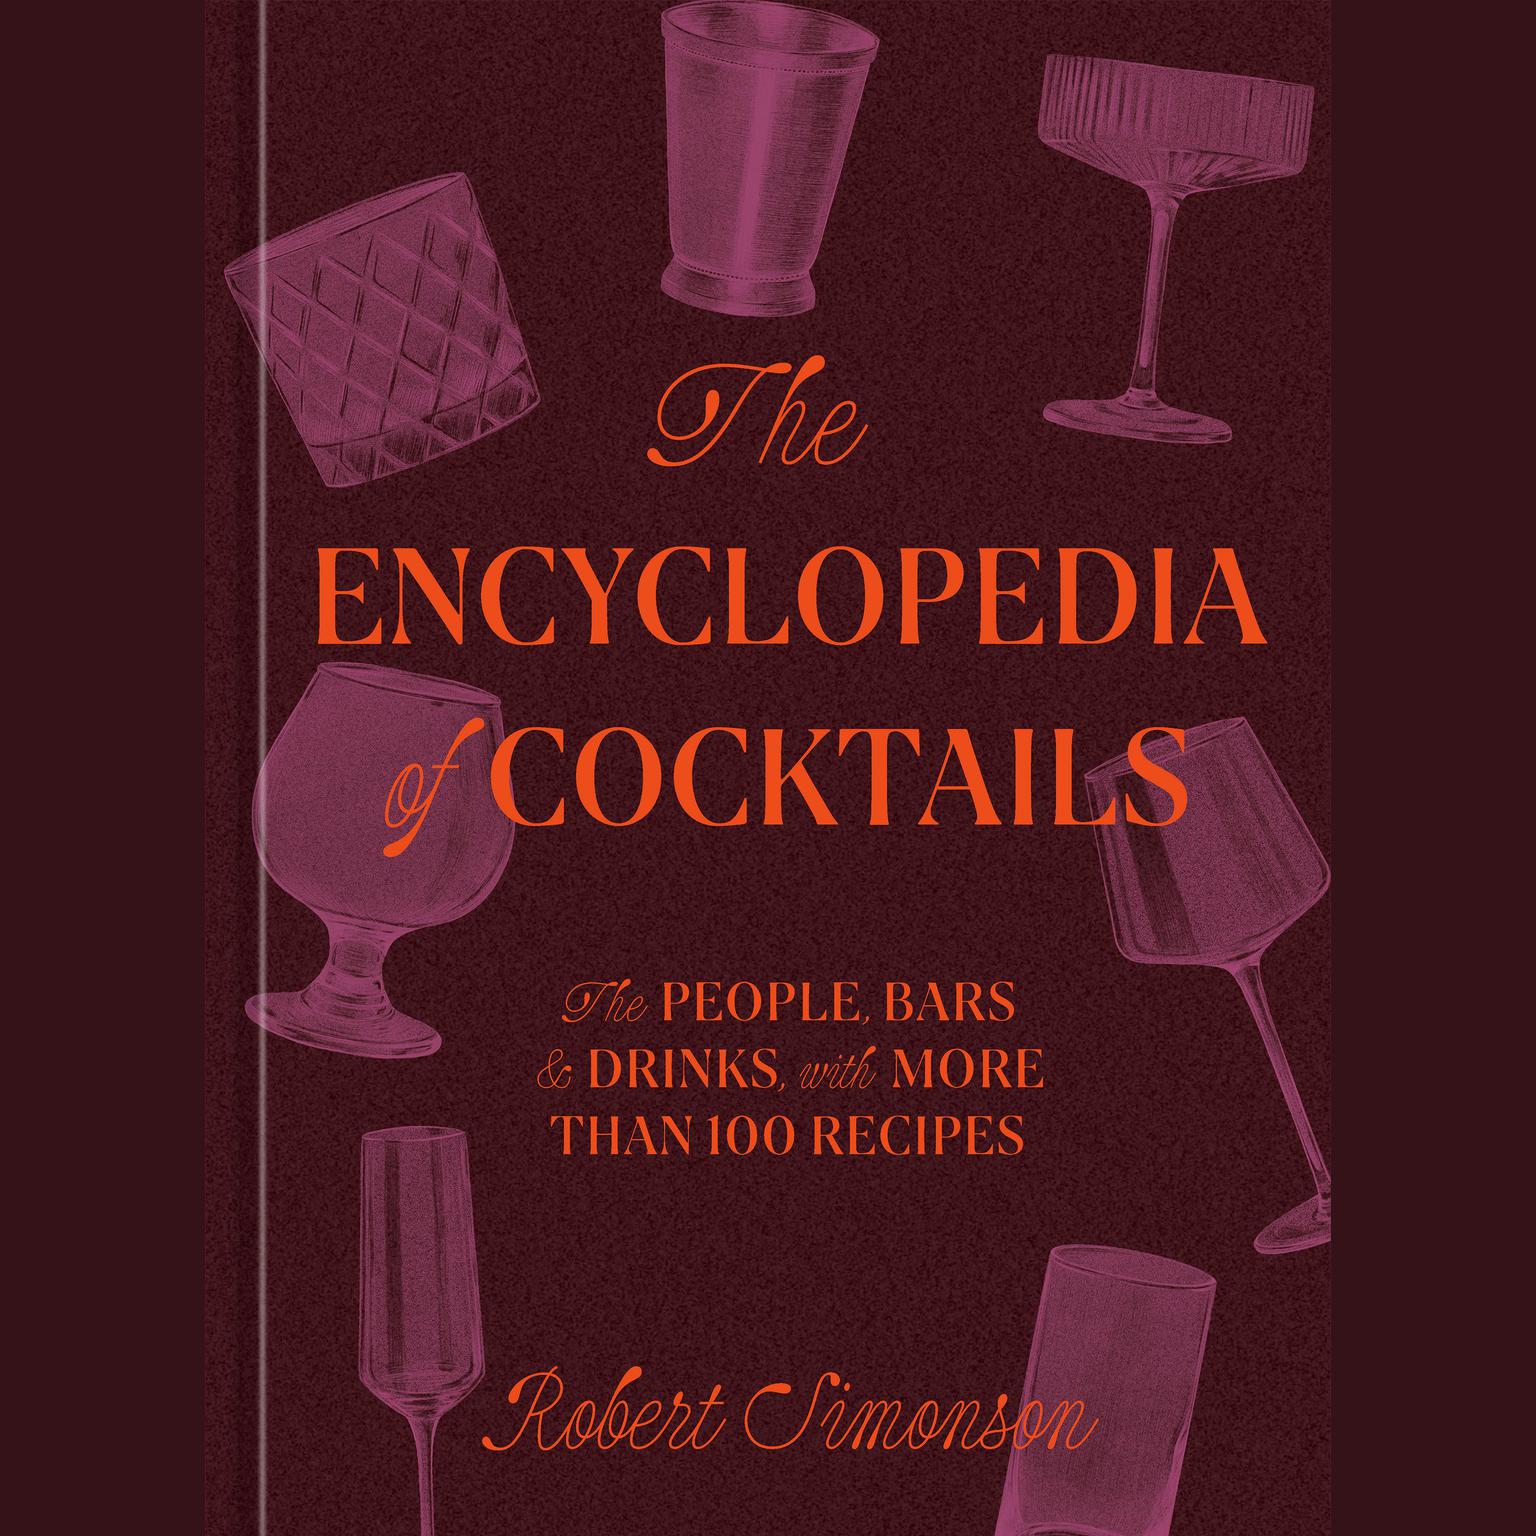 The Encyclopedia of Cocktails: The People, Bars & Drinks, with More Than 100 Recipes Audiobook, by Robert Simonson